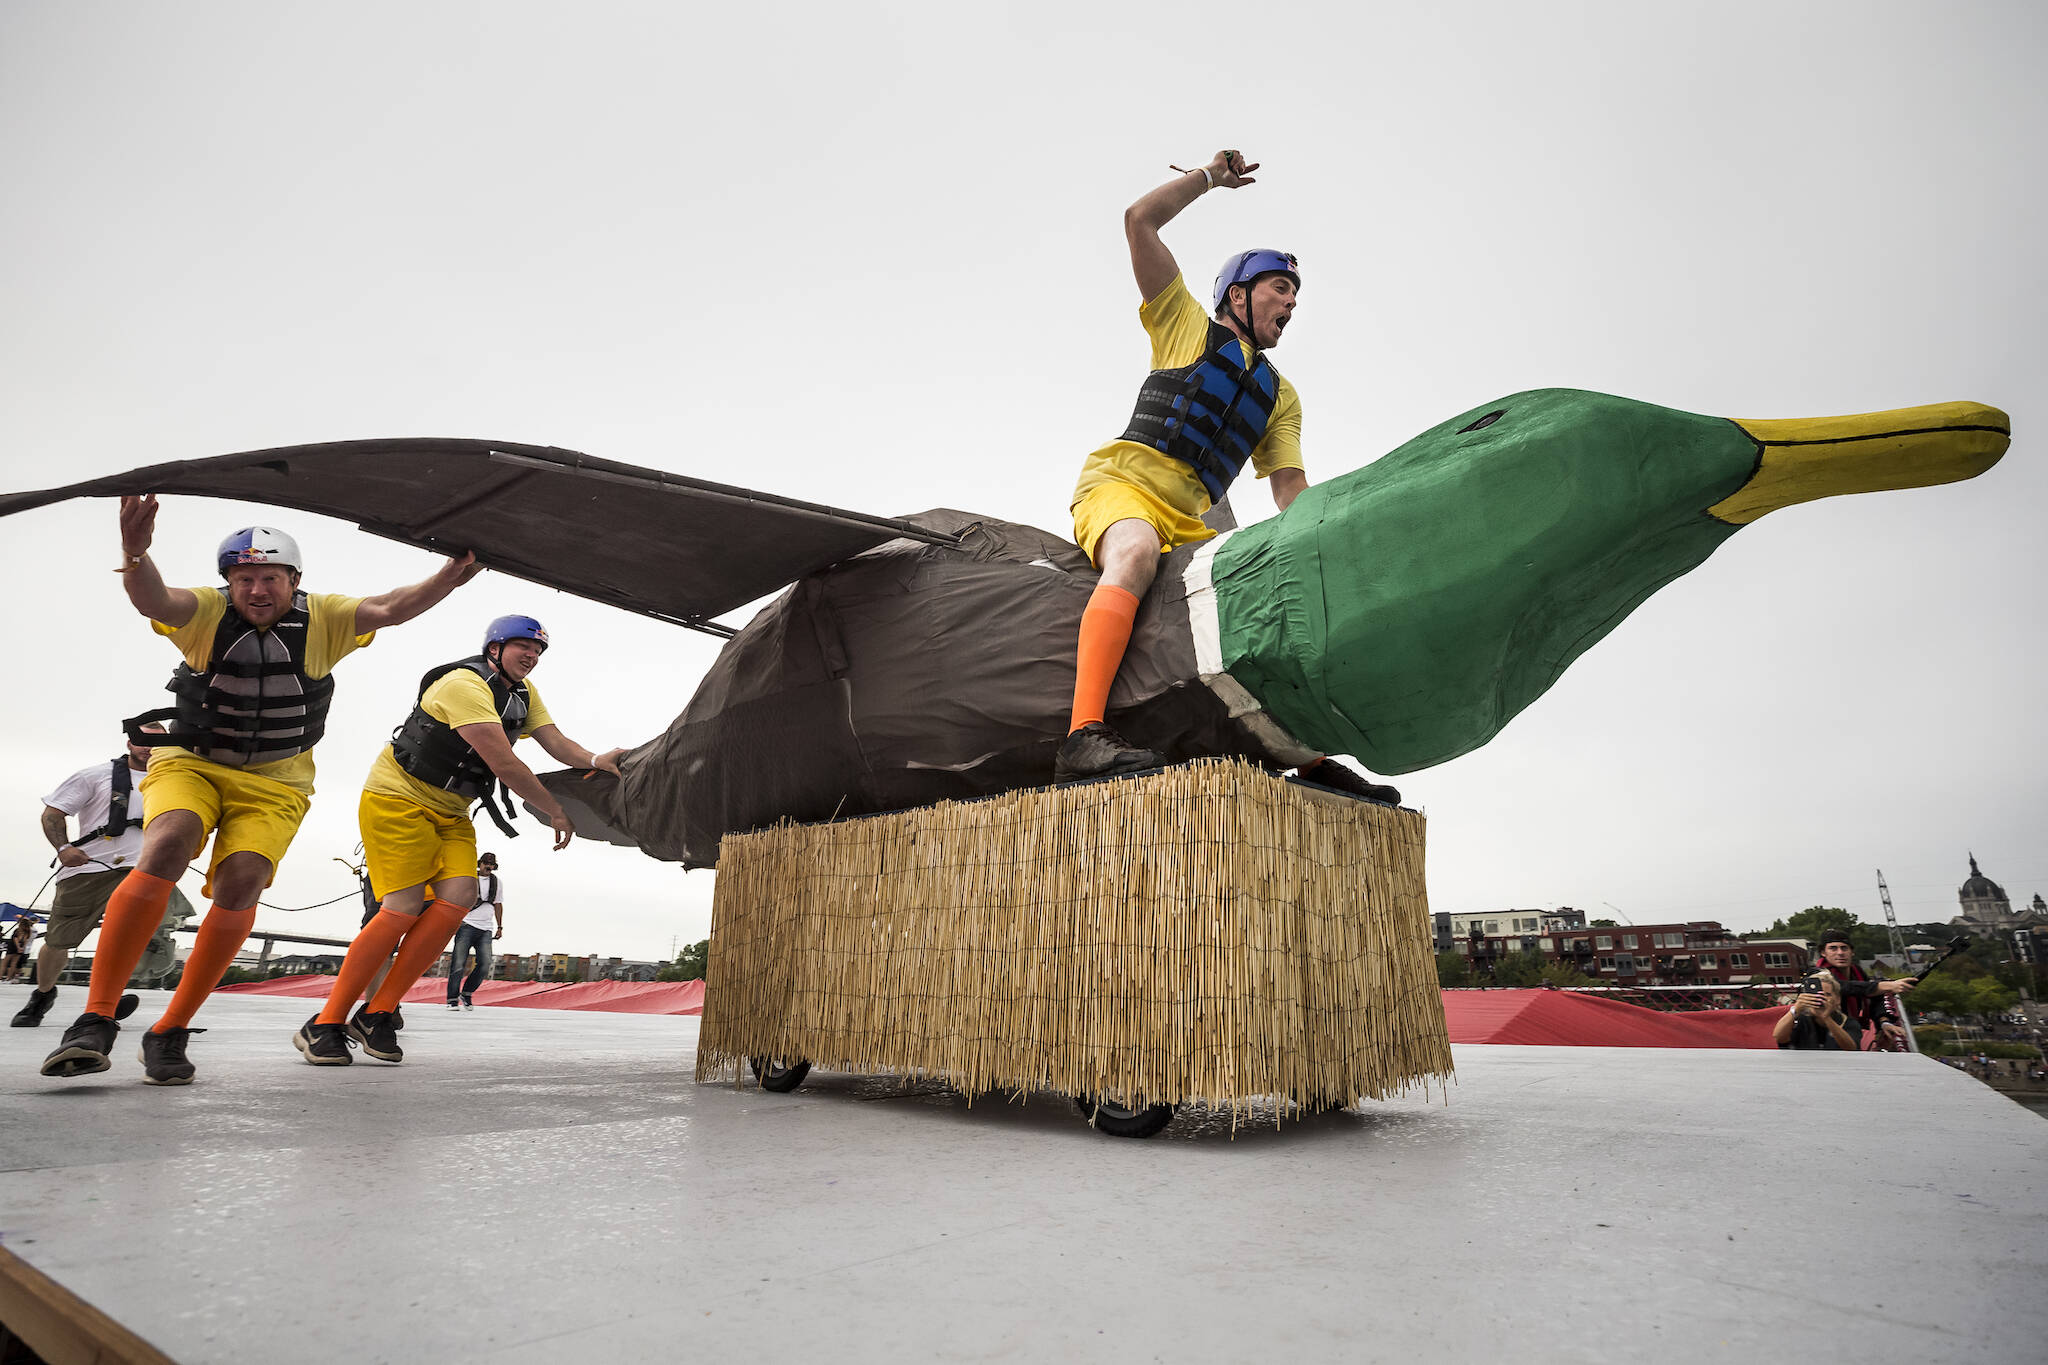 Red Bull's wild flying machine contest hitting Toronto and you'll have see to believe it